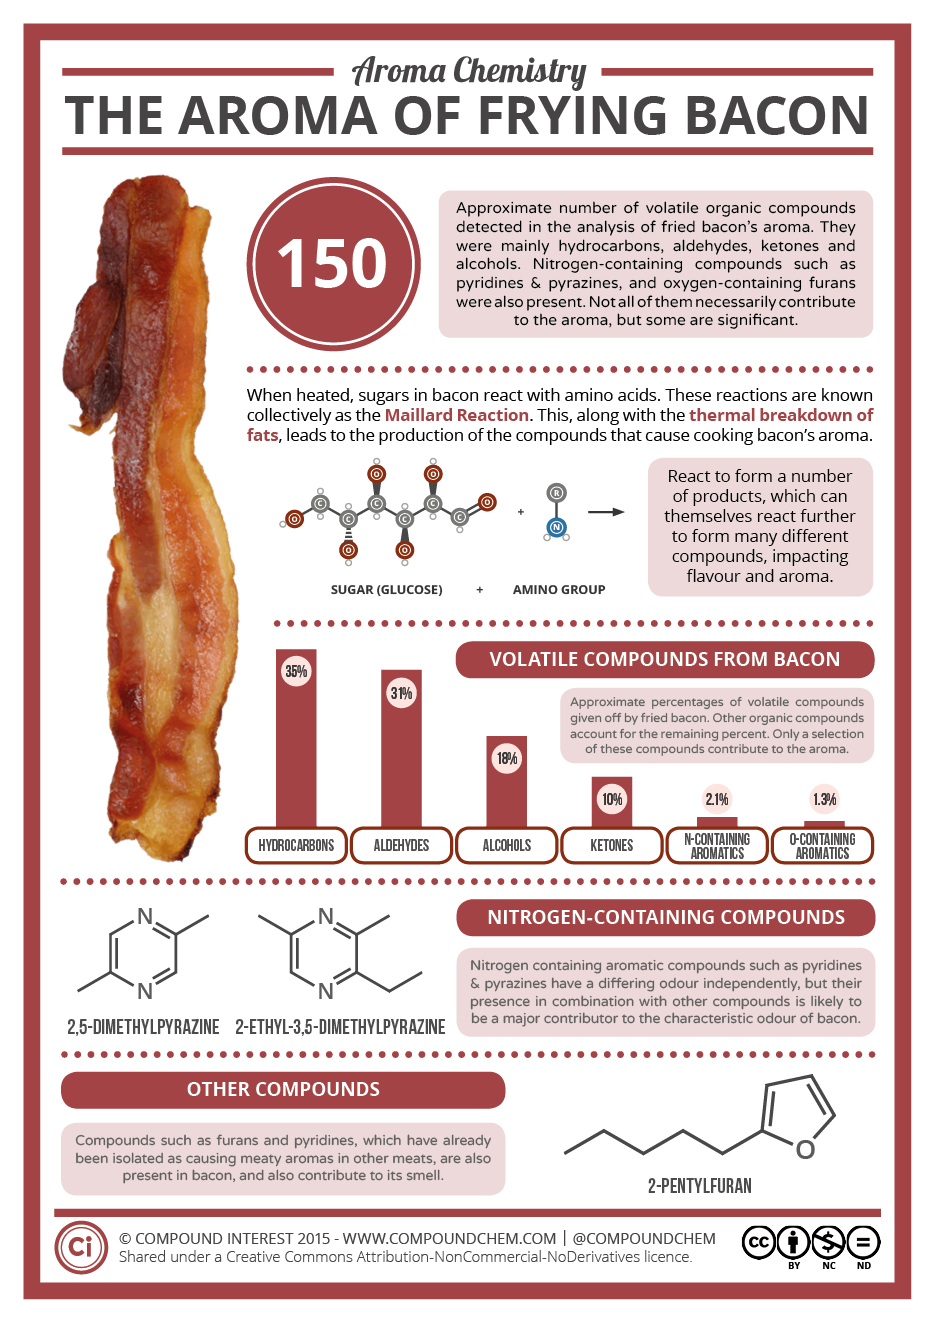 It’s International Bacon Day tomorrow! To mark the occasion, here’s a reworked graphic on the compounds behind the smell of frying bacon: http://wp.me/p4aPLT-dm